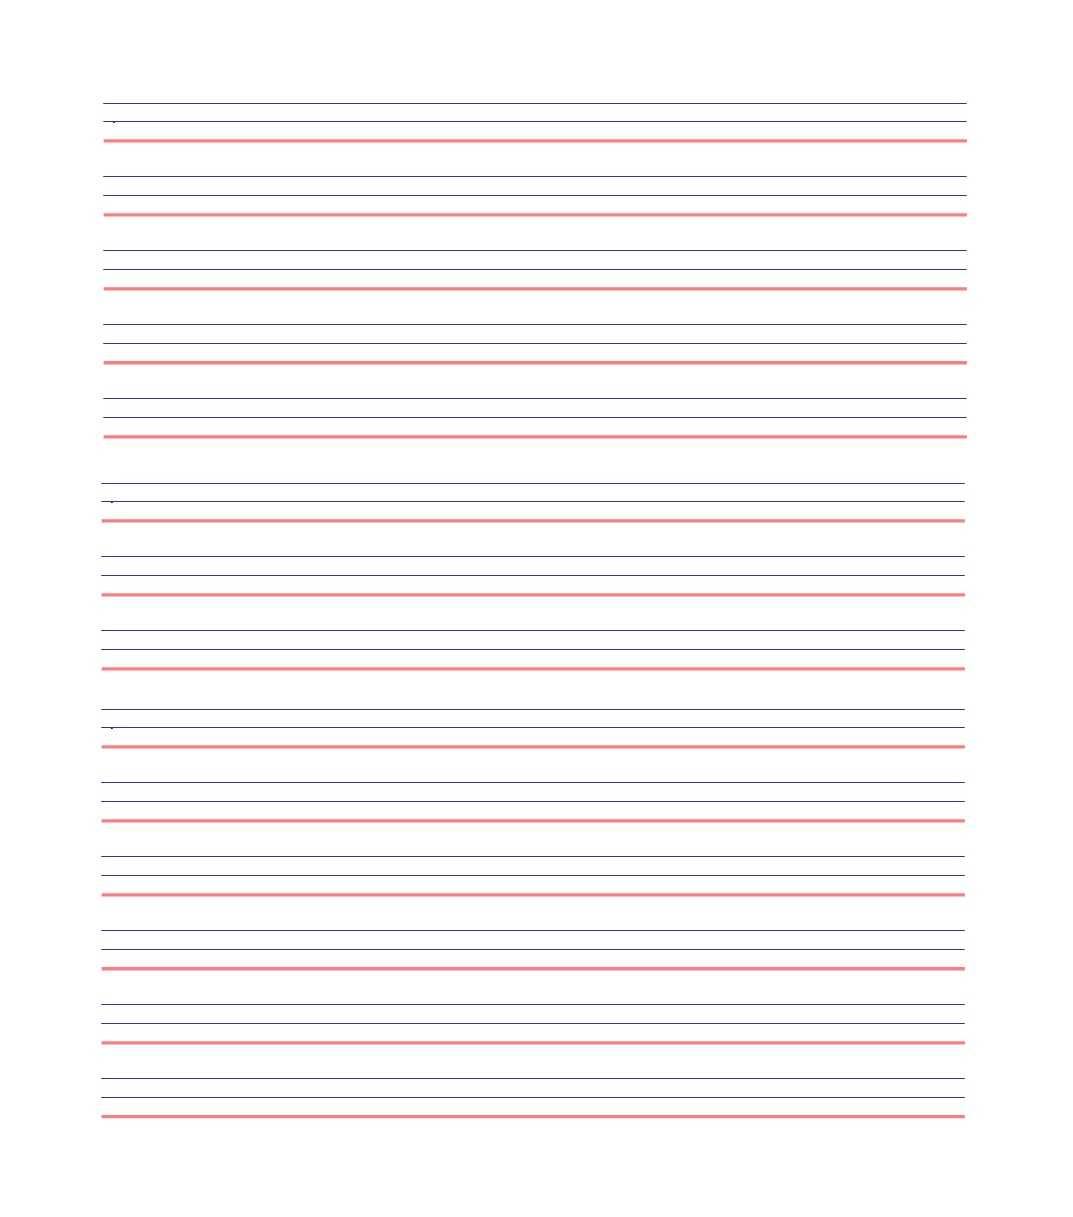 Microsoft Word Notebook Paper Template - Dalep.midnightpig.co Throughout Notebook Paper Template For Word 2010